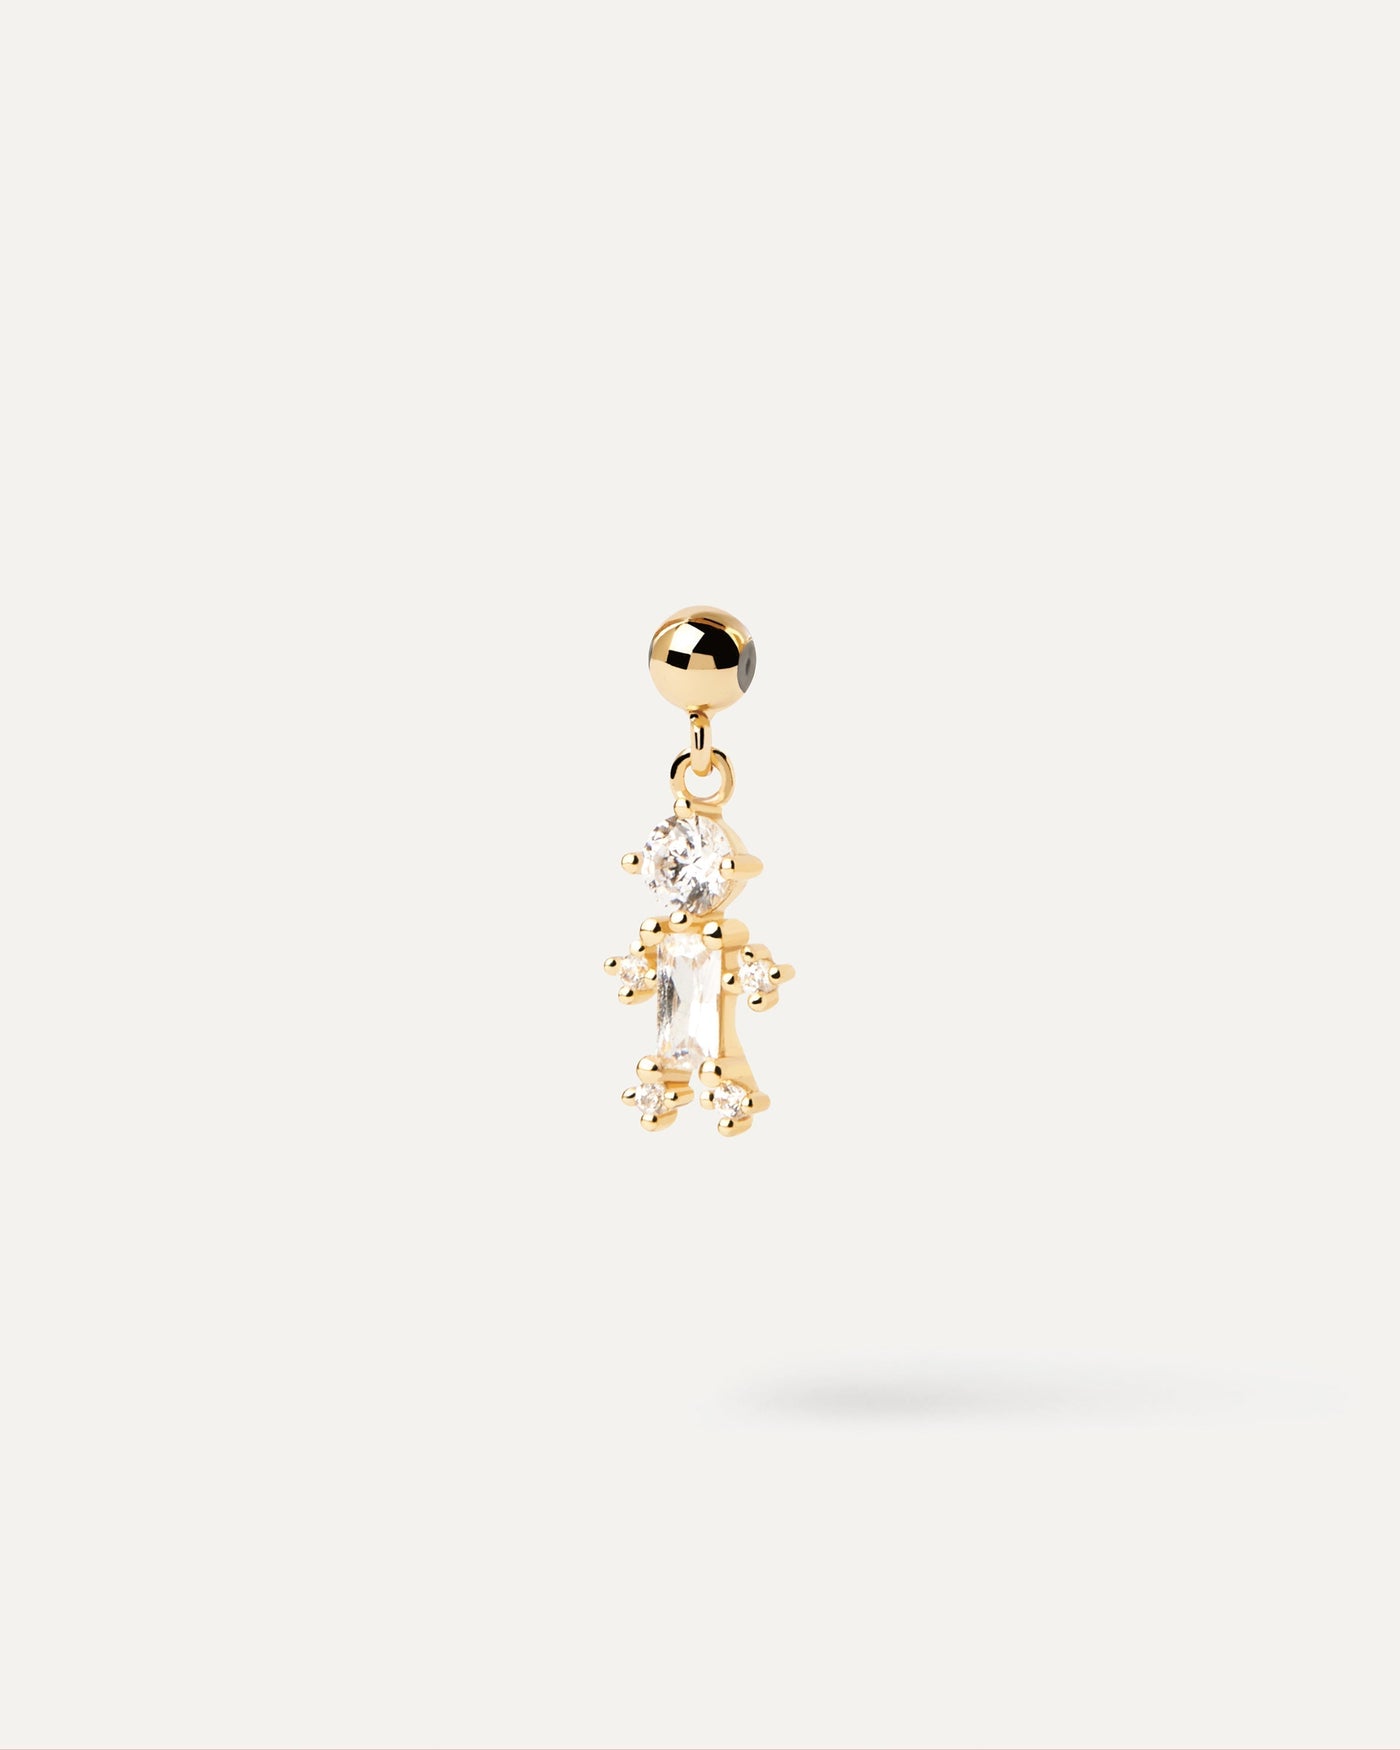 2023 Selection | Mini Me Charm. Get the latest arrival from PDPAOLA. Place your order safely and get this Best Seller. Free Shipping.